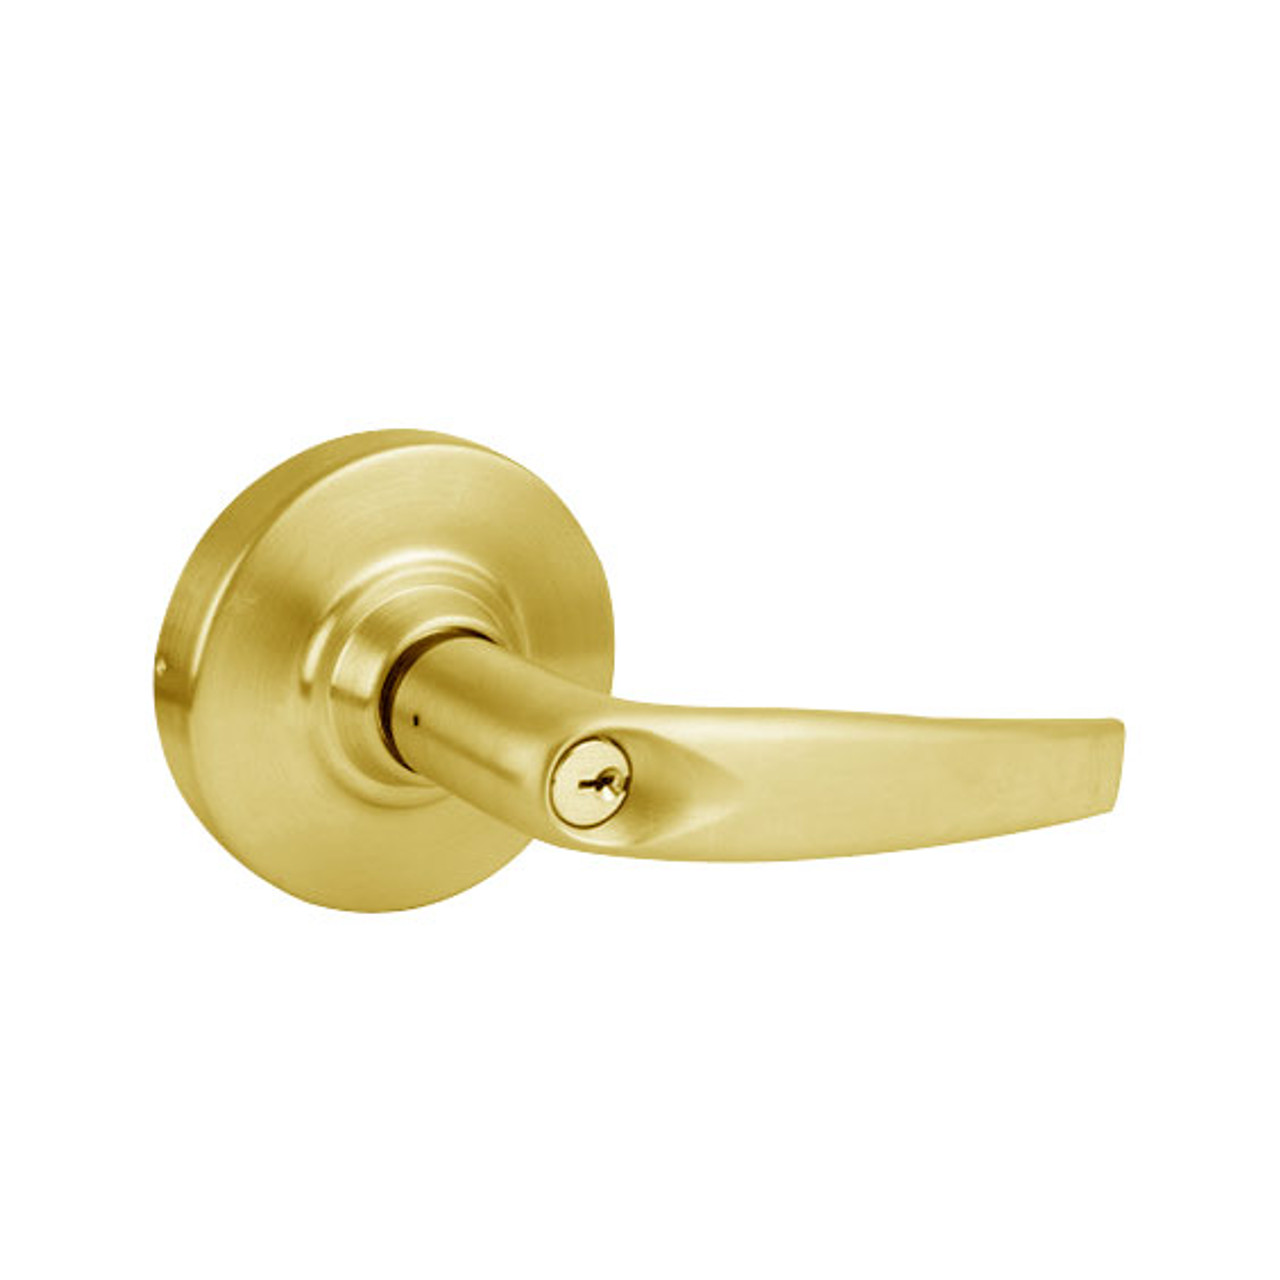 ND60PD-ATH-605 Schlage Athens Cylindrical Lock in Bright Brass